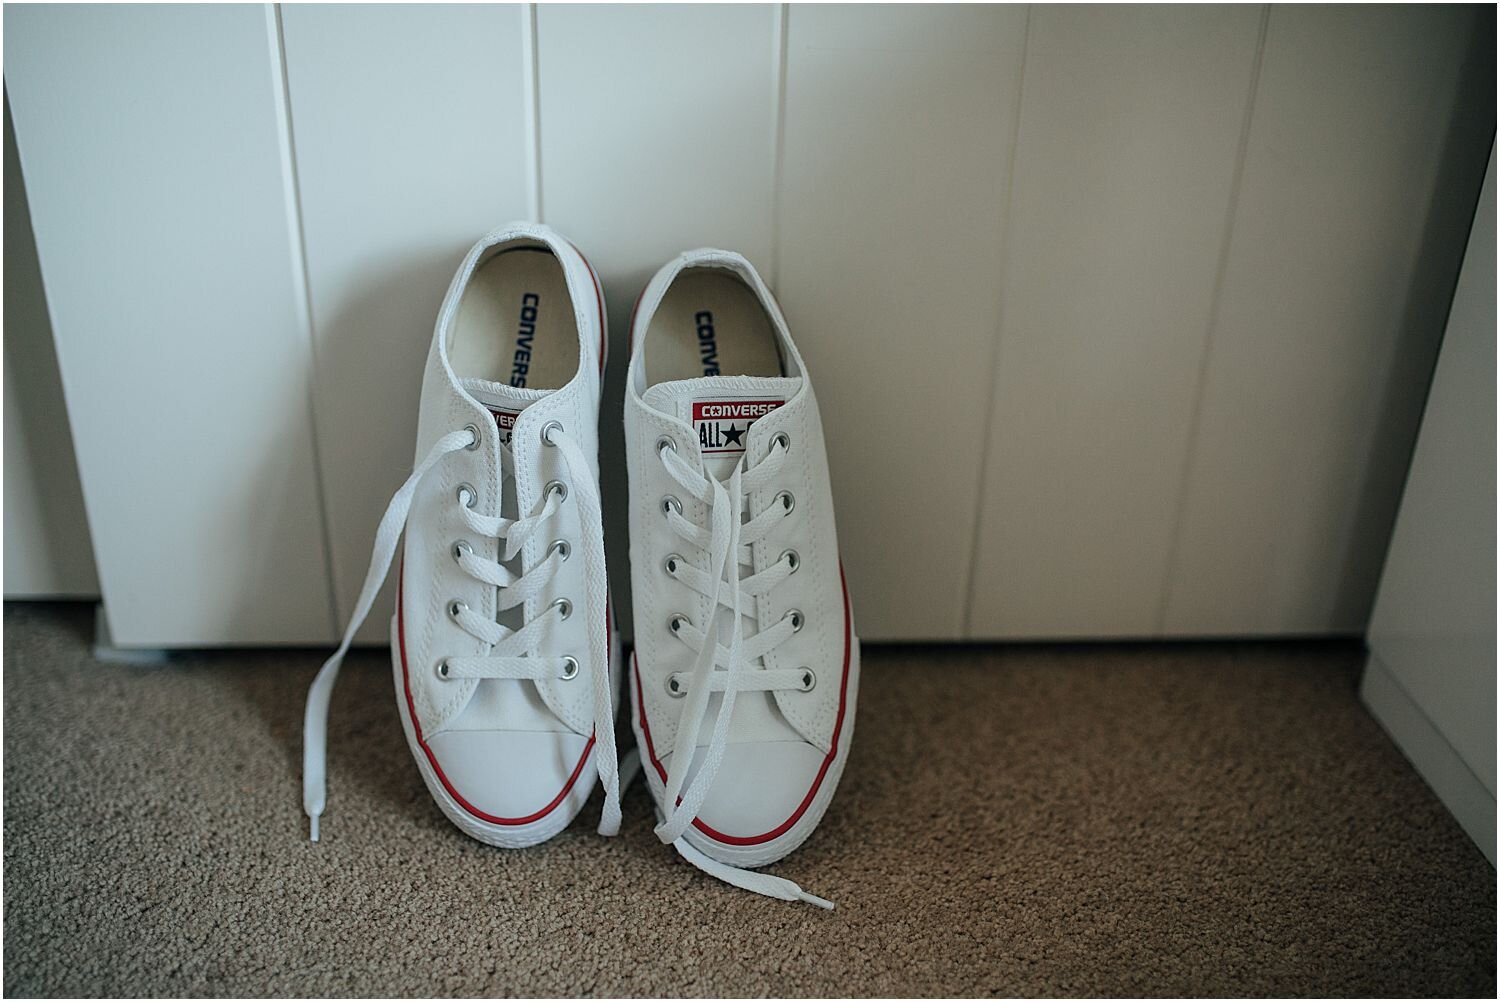 Wedding converse trainers